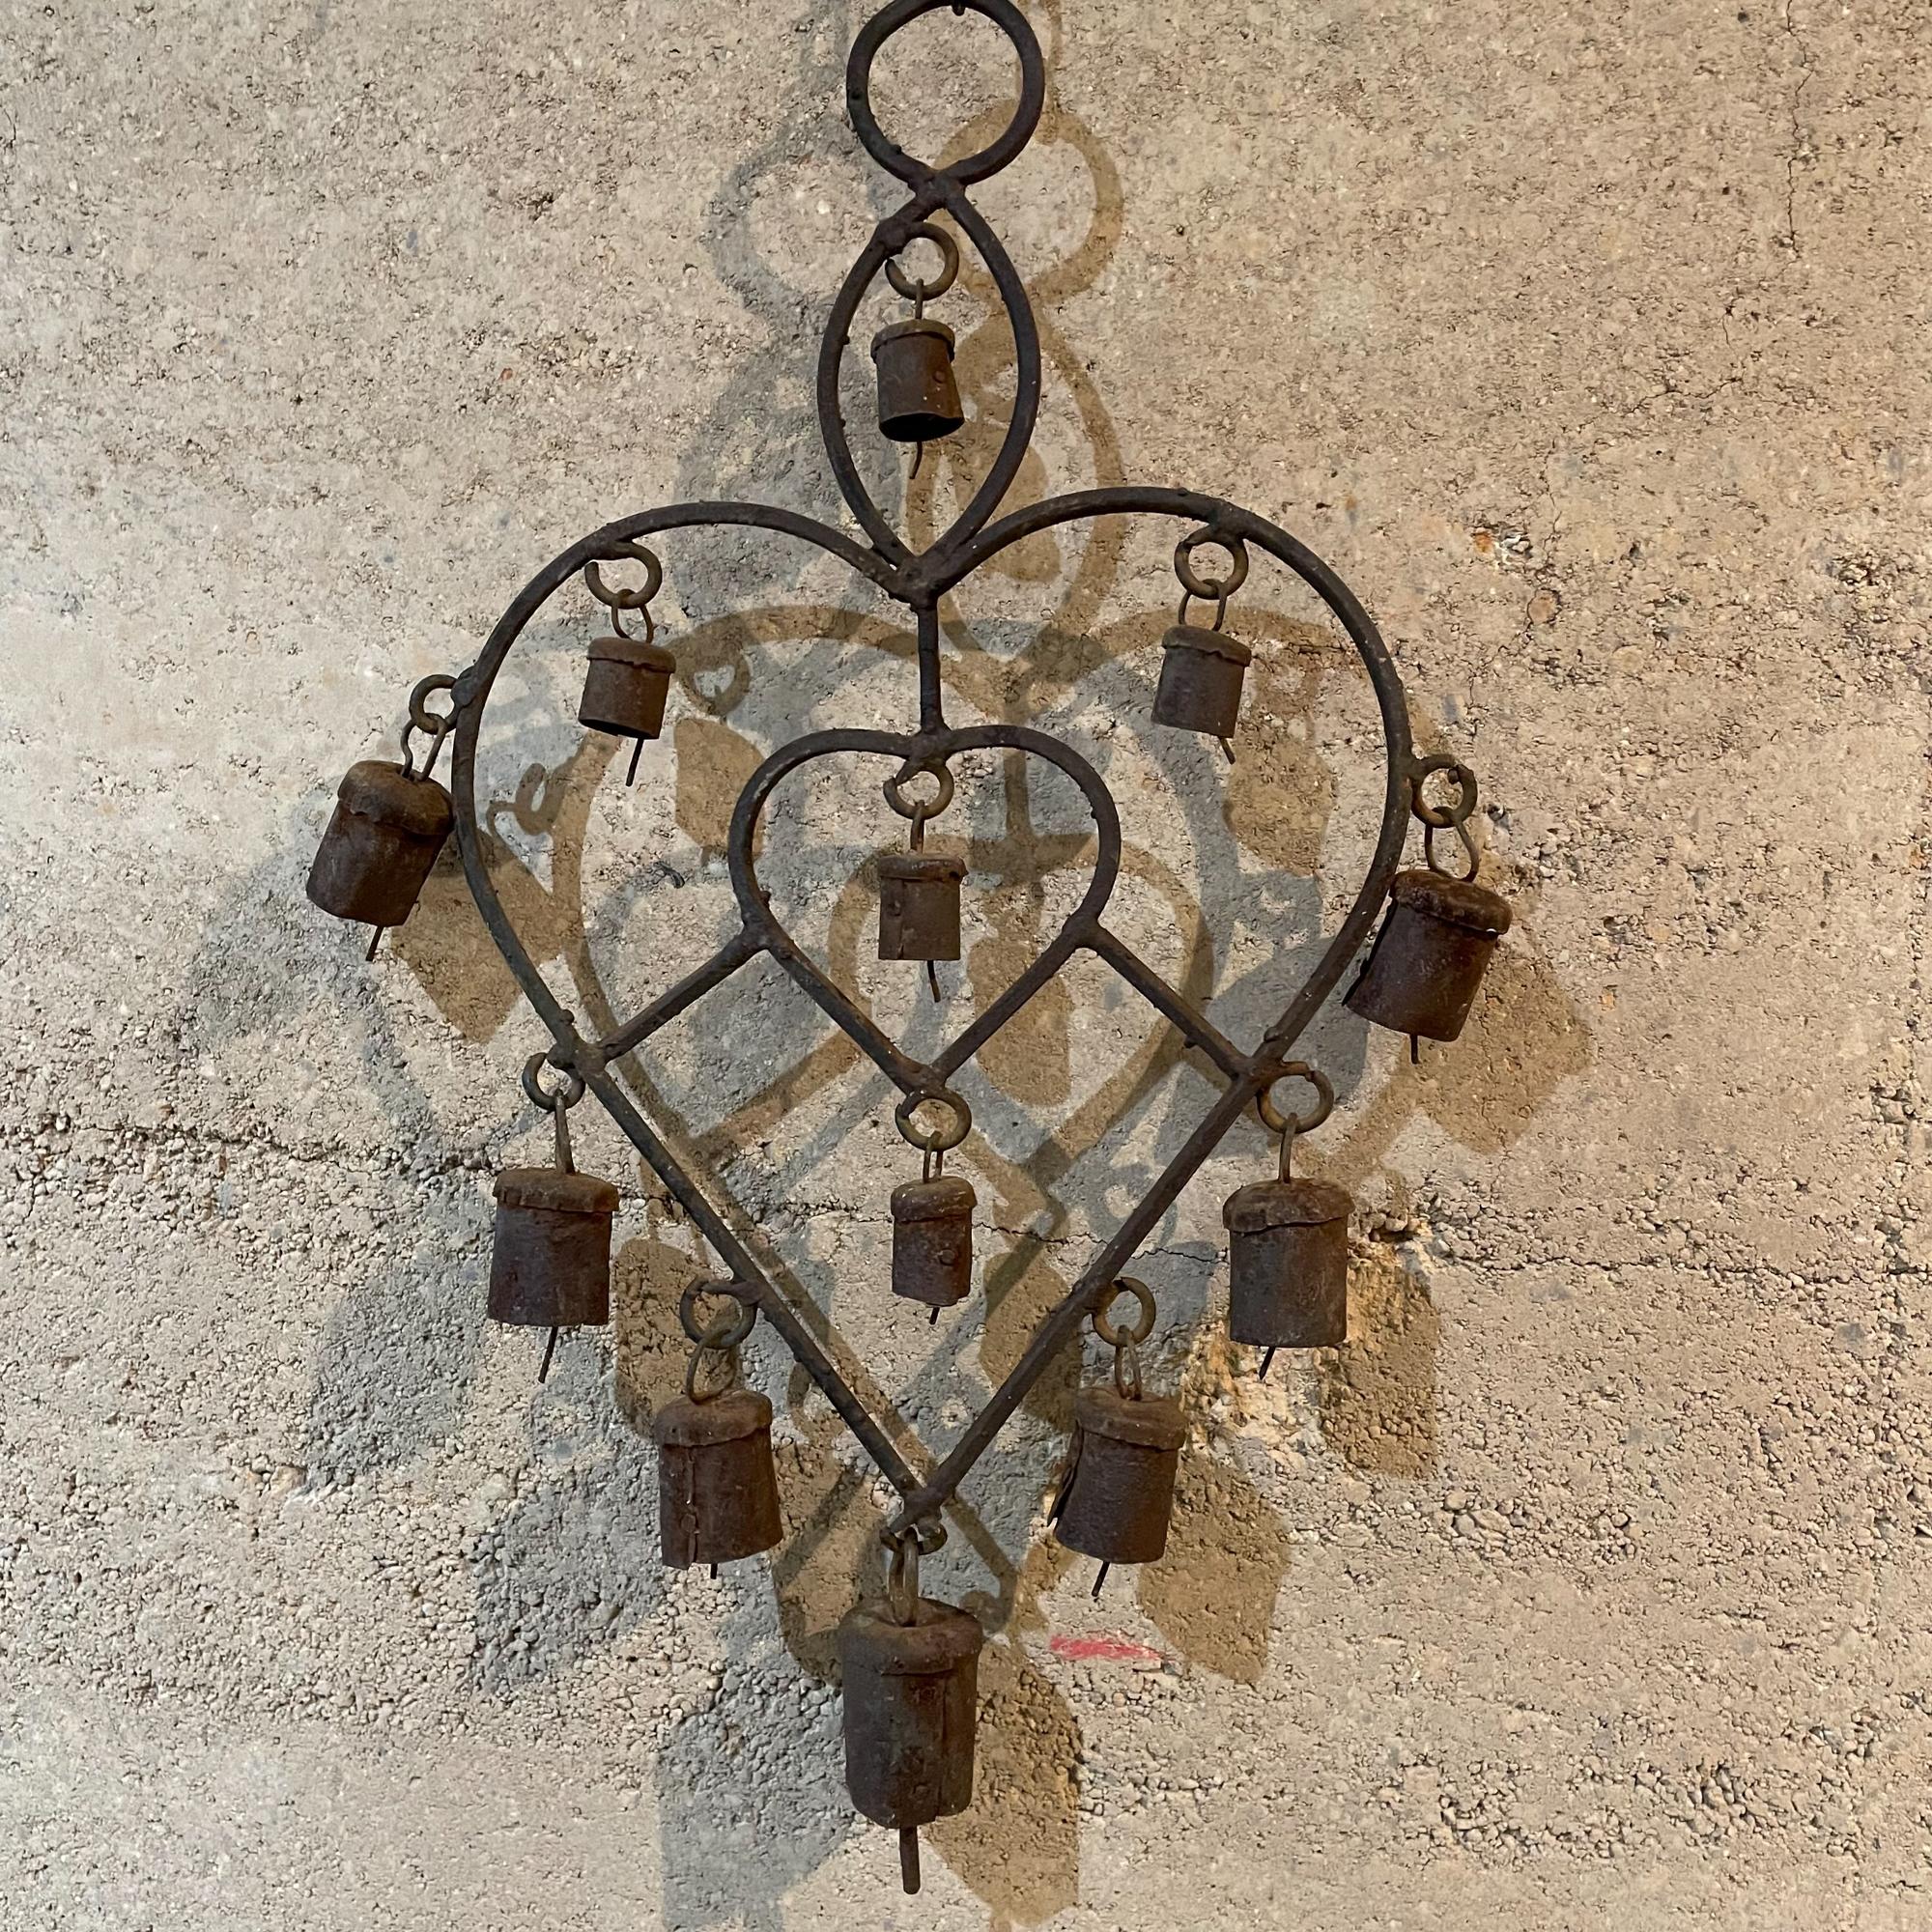 Ornamental Antique Rustic Metal Heart Wall Art Hanging Decor Wall Windchime with Bells from Mexico 1970s
Vintage piece.
Measures:19.5T x 8W x 1.5 inches
Unrestored Vintage Presentation and Condition. Refer to all images.
See dealer for more